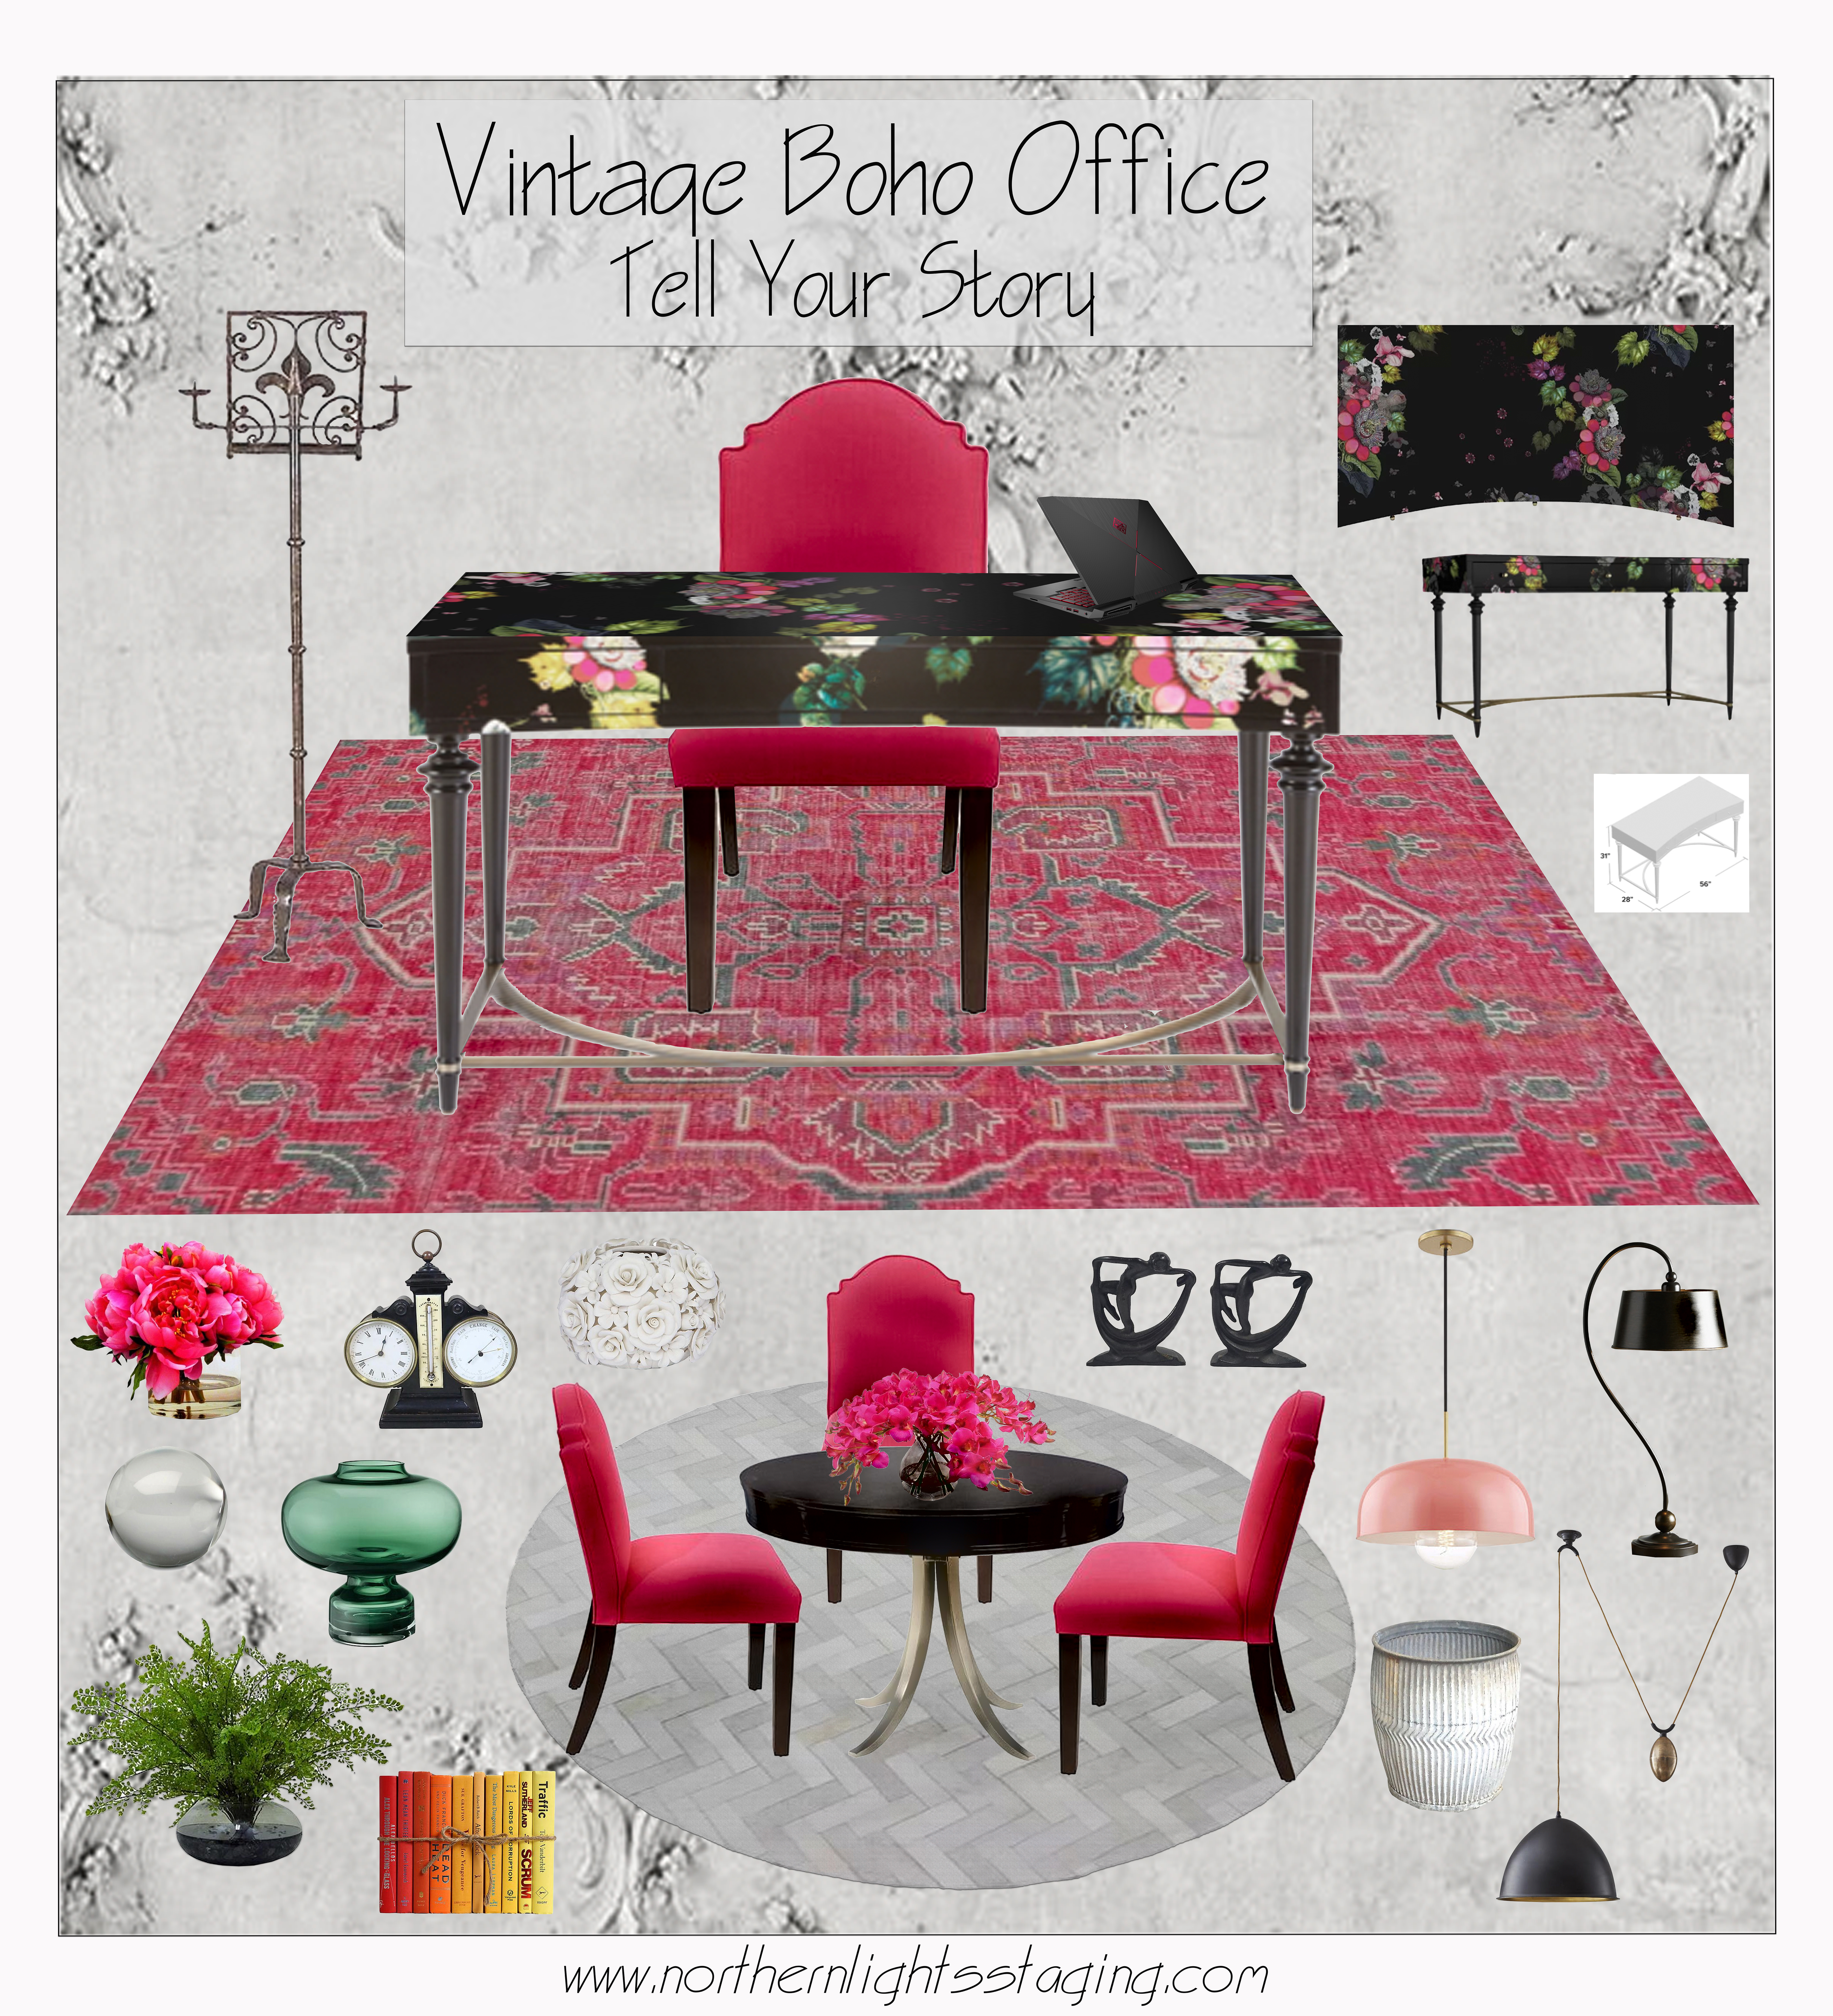 Edesign Tribe Office Design Contest- Vote now! Vintage Boho Office Concept Board by Northern Lights Home Staging and Design #edesigntribe #edesign #vintage #vintageboho #officedesign #globalstyle #colorfuloffice